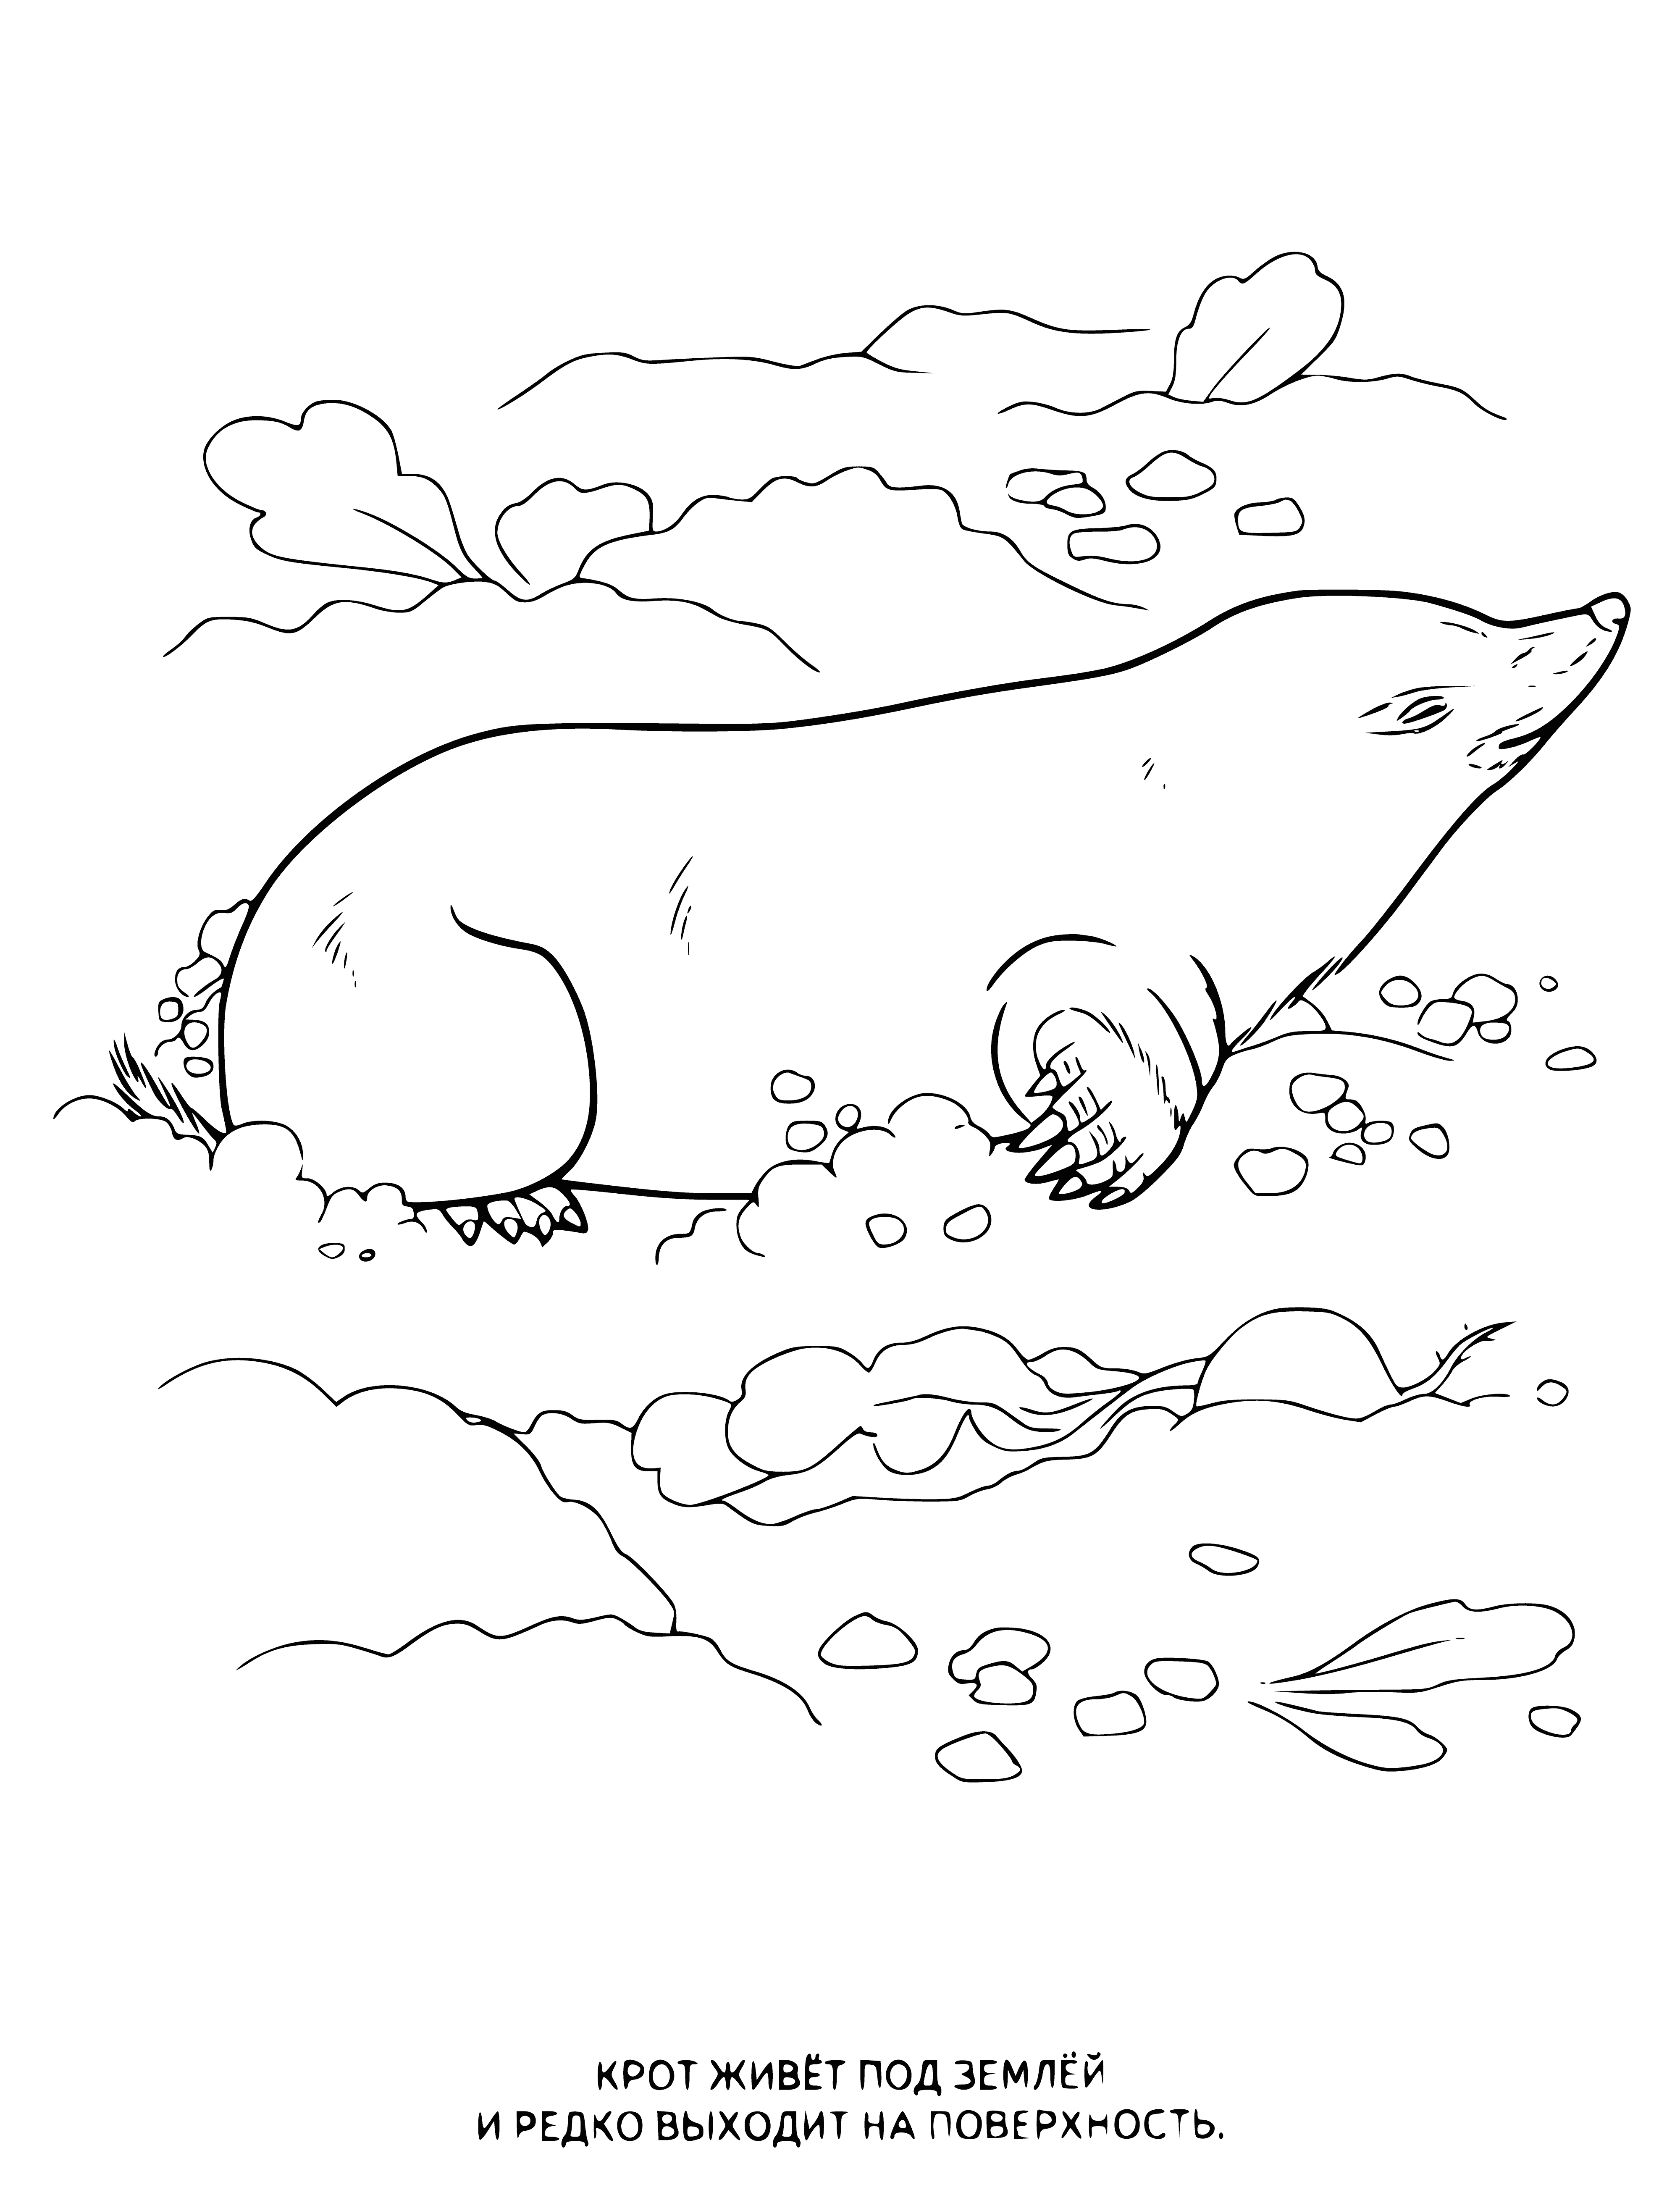 coloring page: Mole digs burrows with long, sharp claws. Has fur and long, pointed snout. Brownish-black with light underside. Solitary and rarely seen by humans.